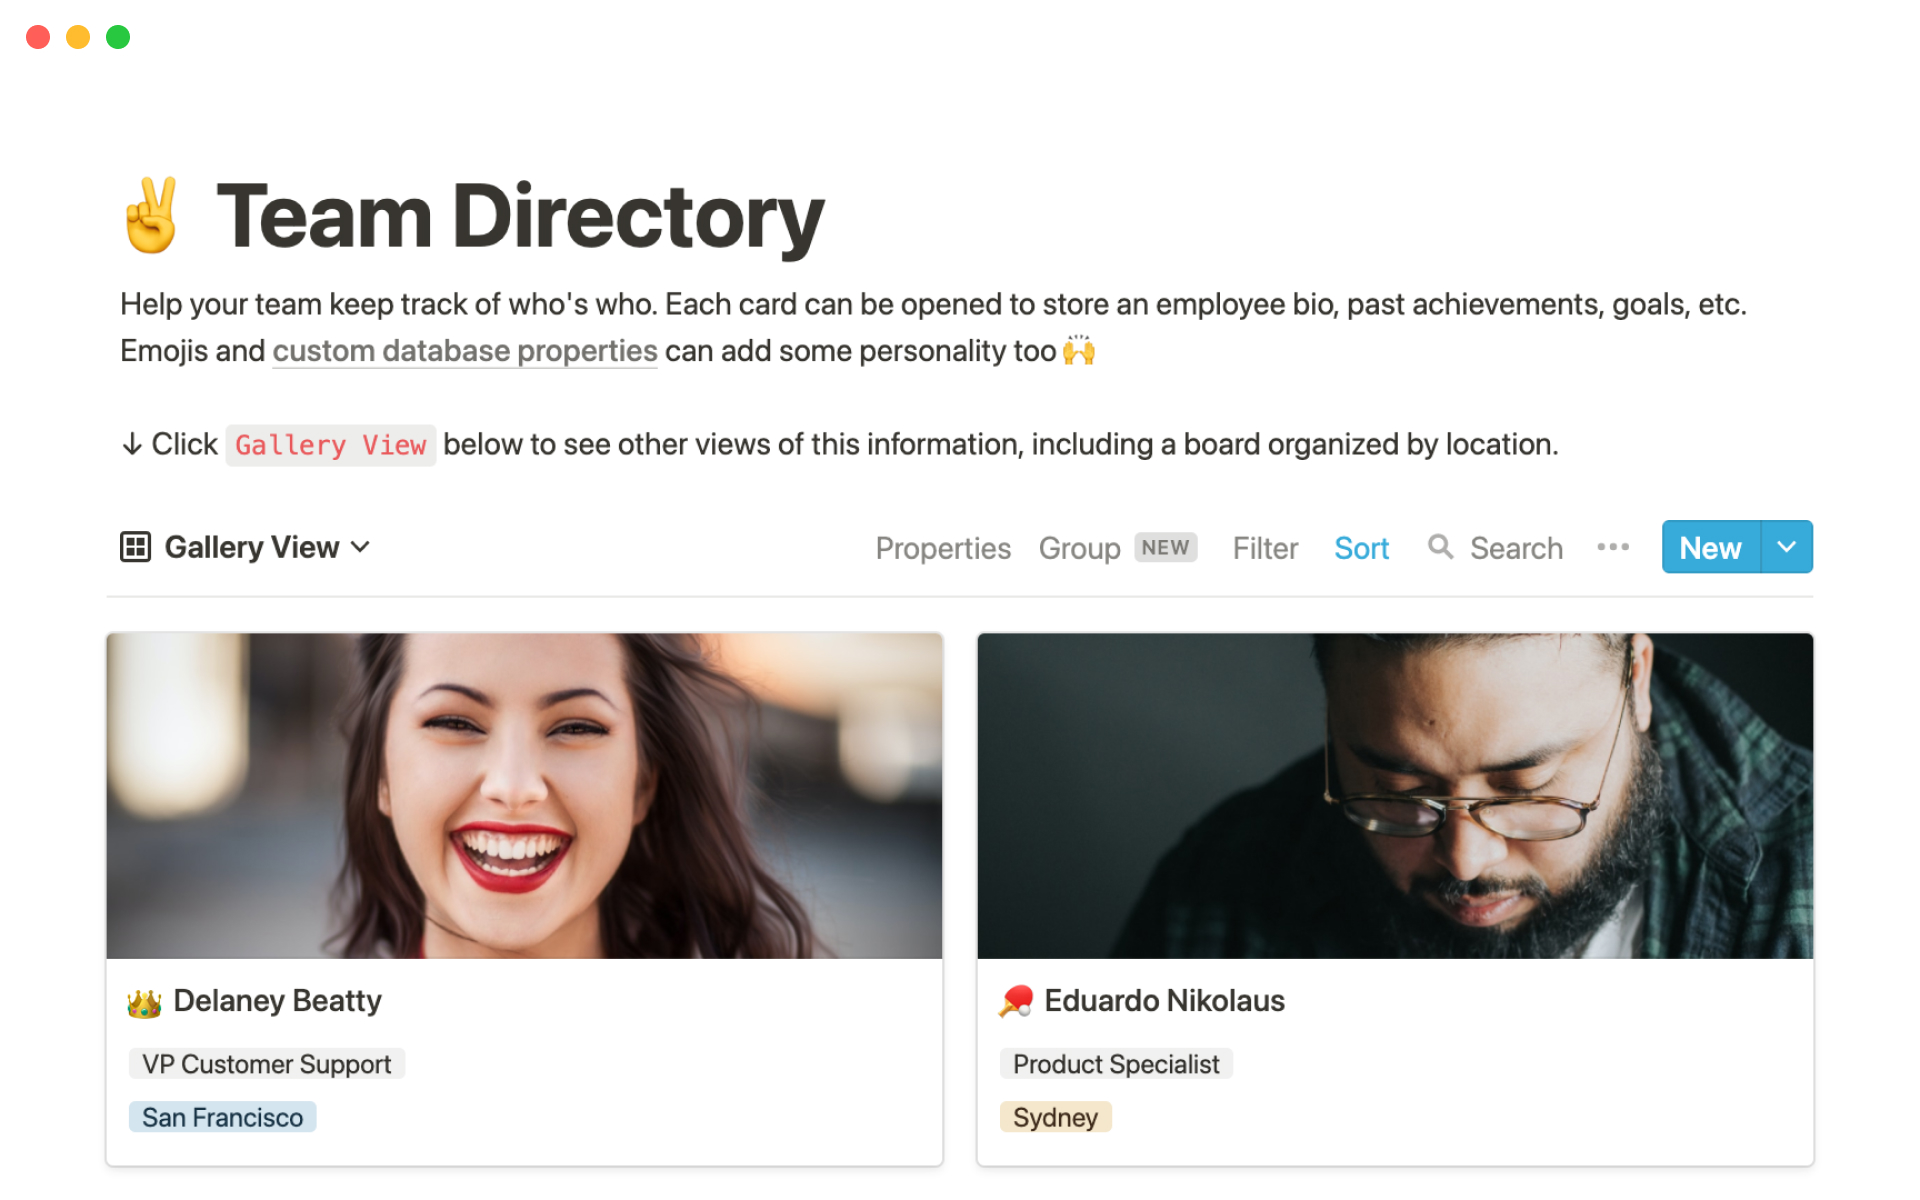 The desktop image for the Team Directory template